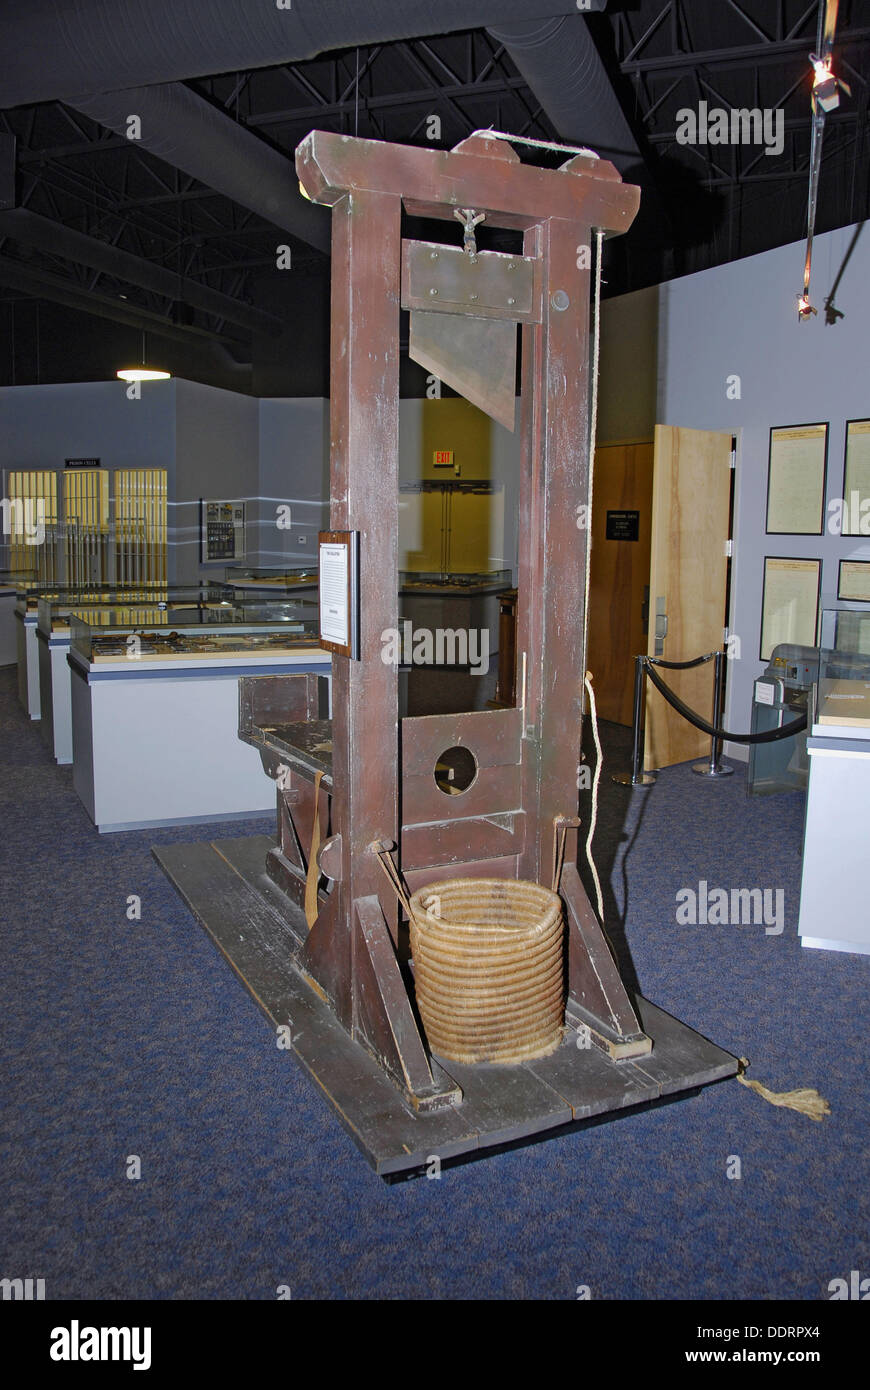 guillotine-at-american-police-hall-of-fame-titusville-florida-fl-DDRPX4.jpg